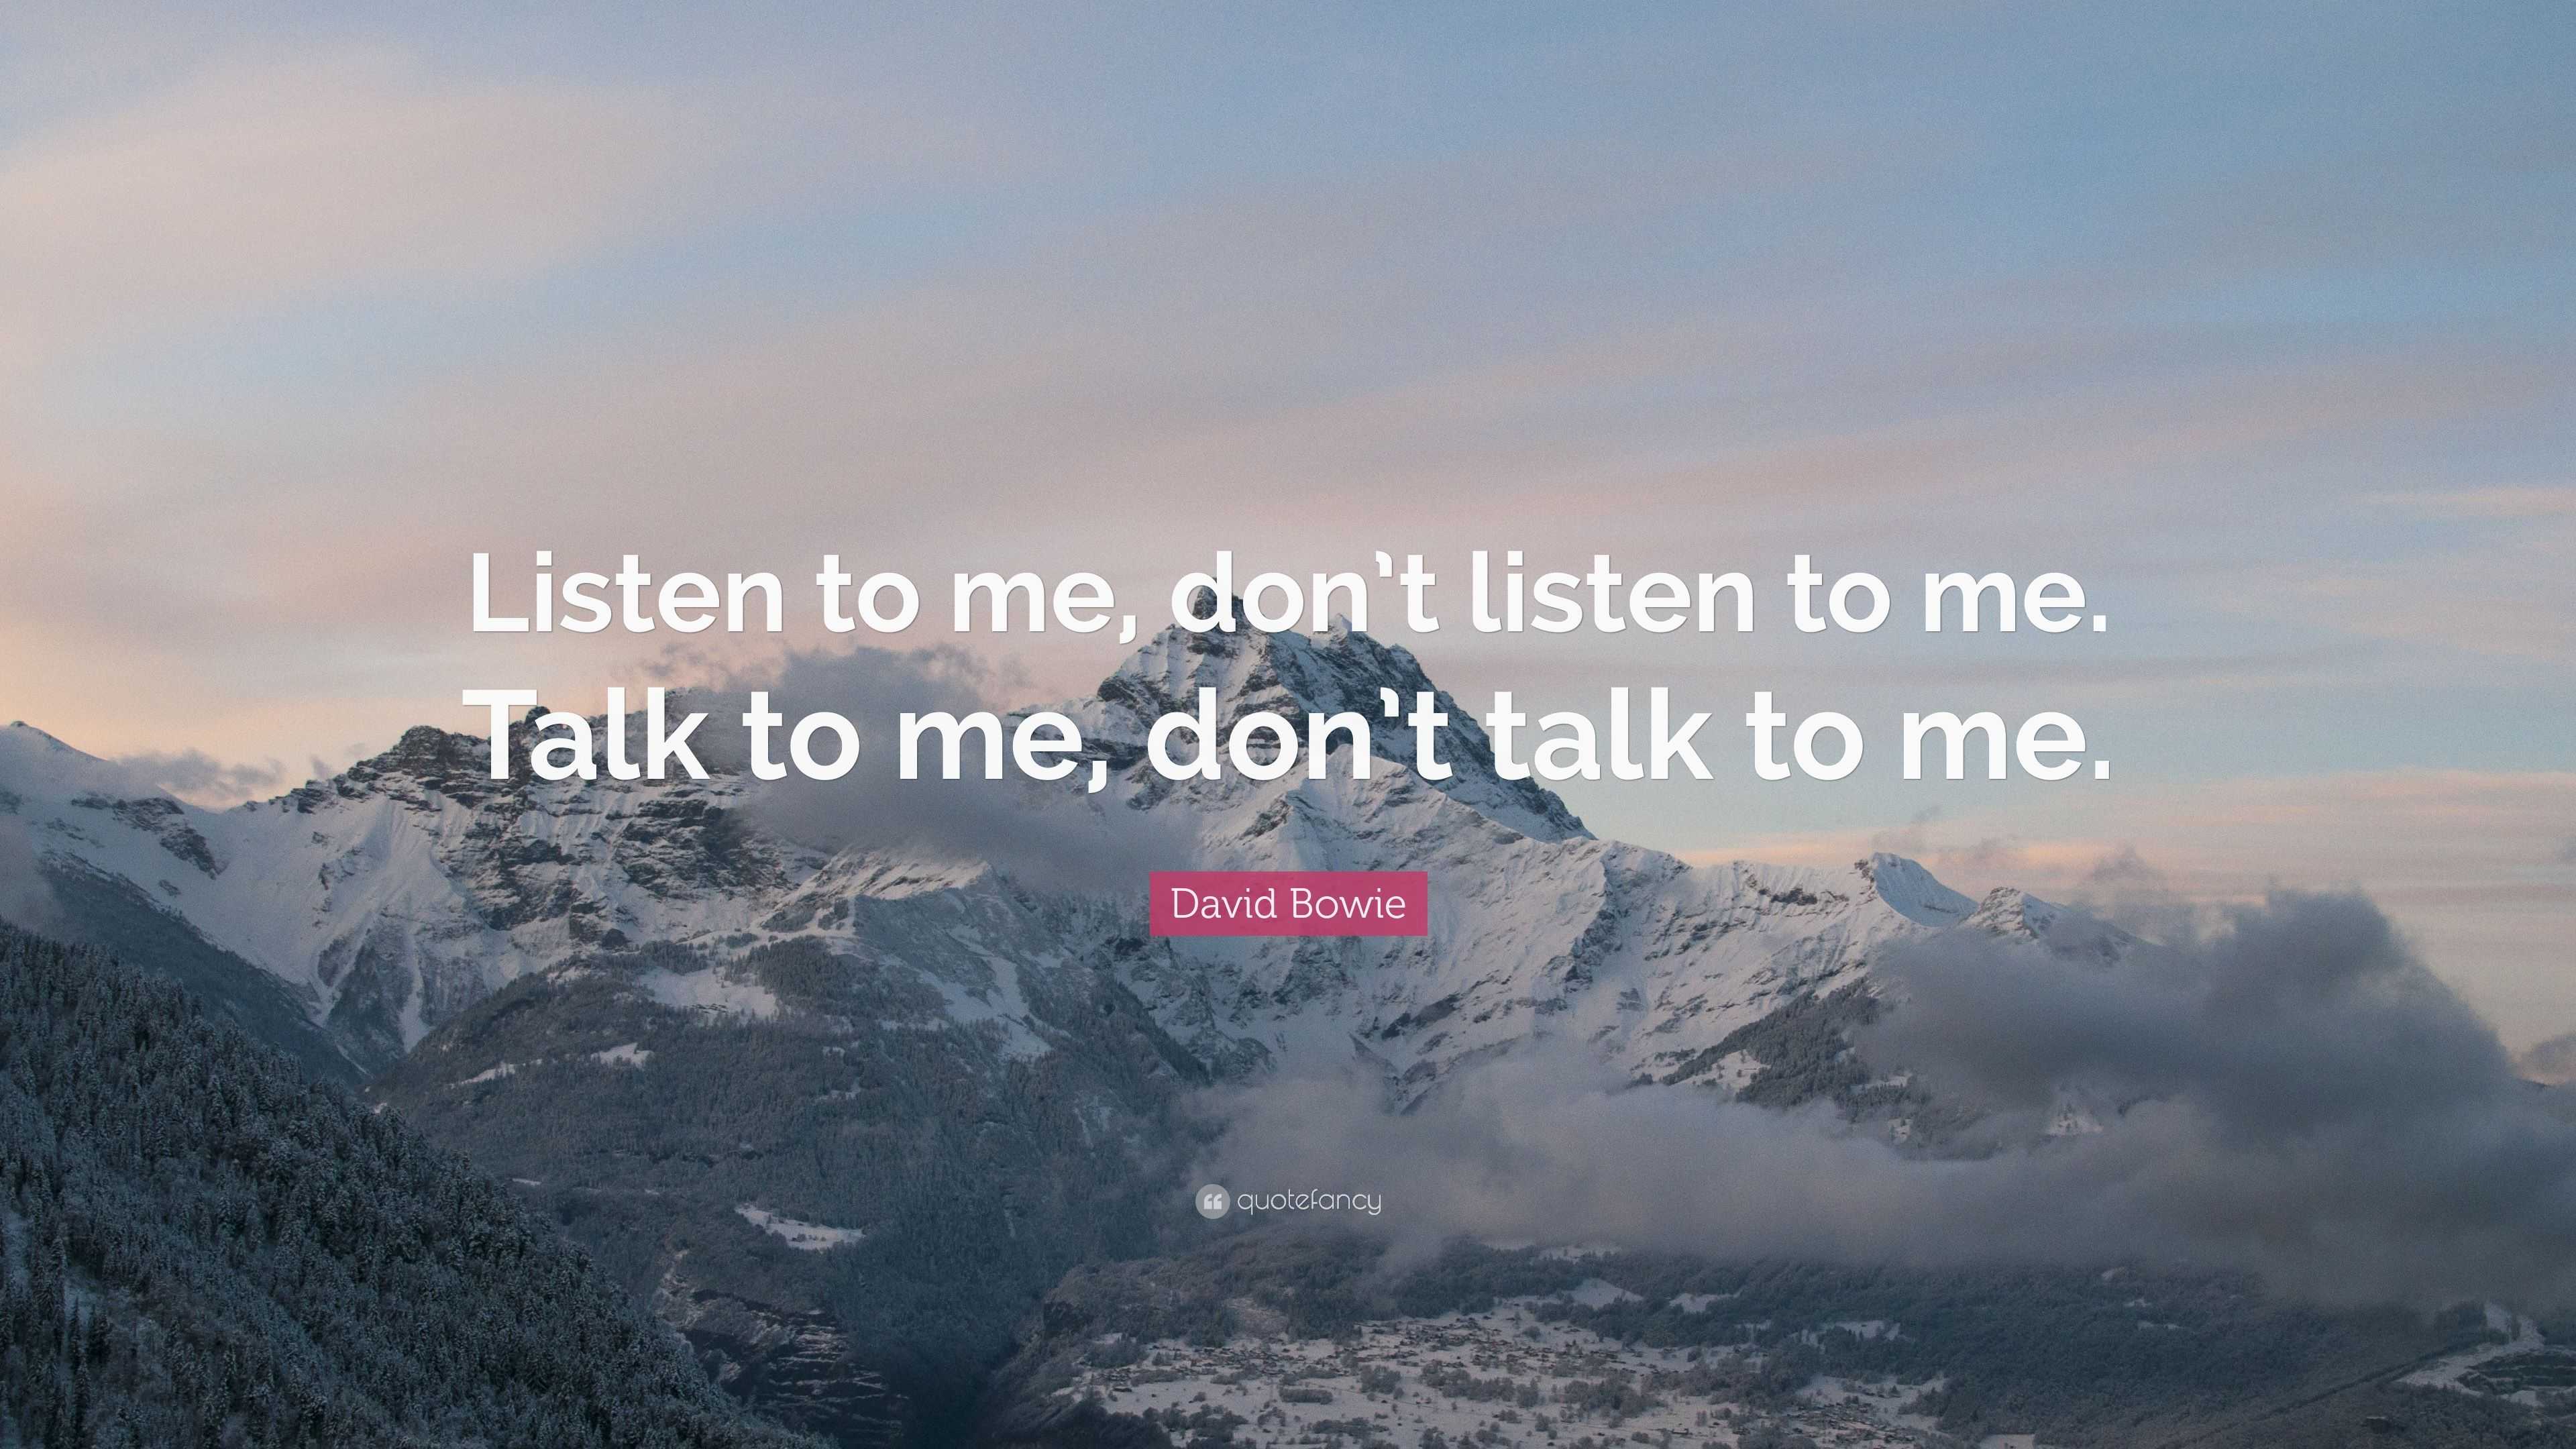 David Bowie Quote: “Listen to me, don’t listen to me. Talk to me, don’t ...